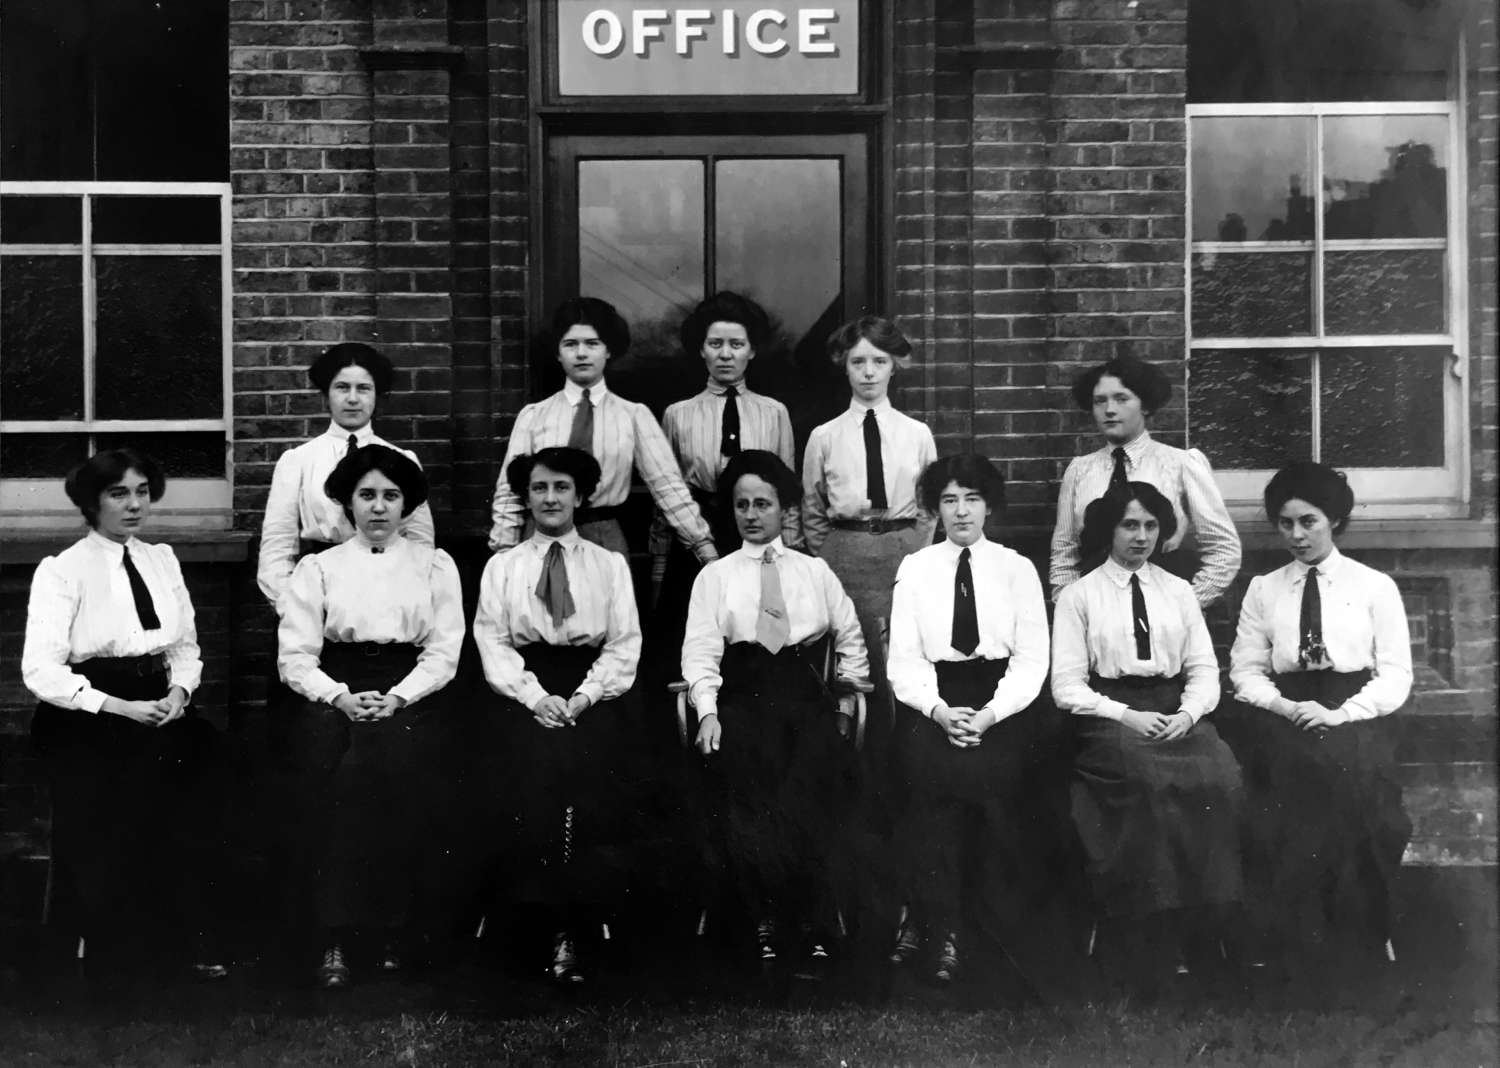 Monotype office workers, c. 1910. Courtesy Richard Cooper